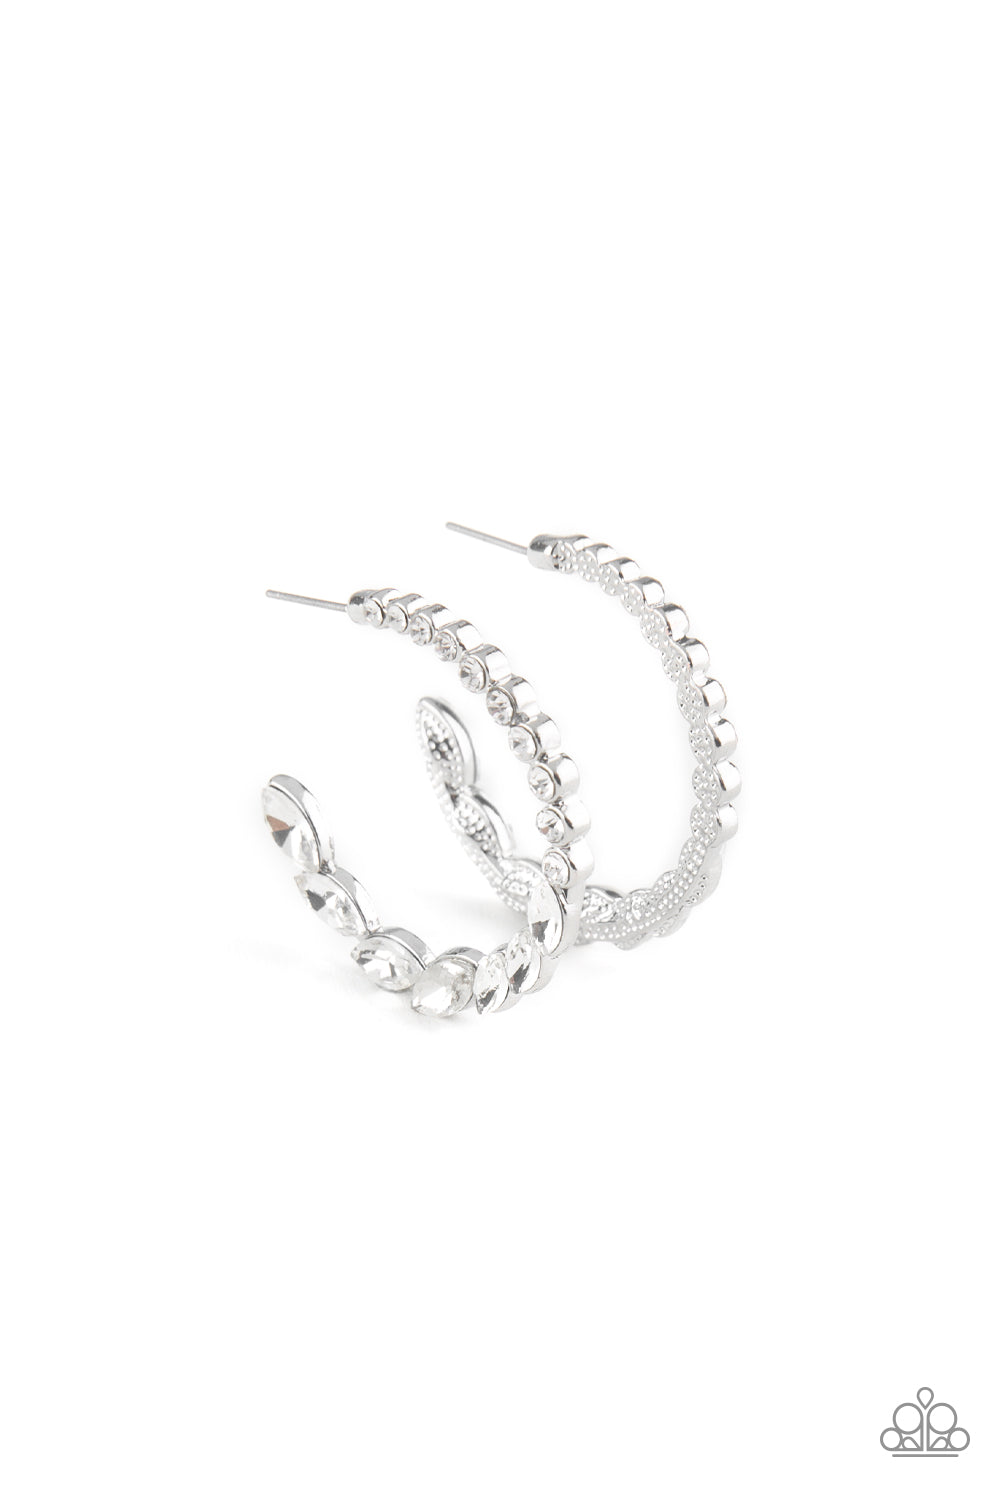 Prime Time Princess - White Earrings - Paparazzi Accessories